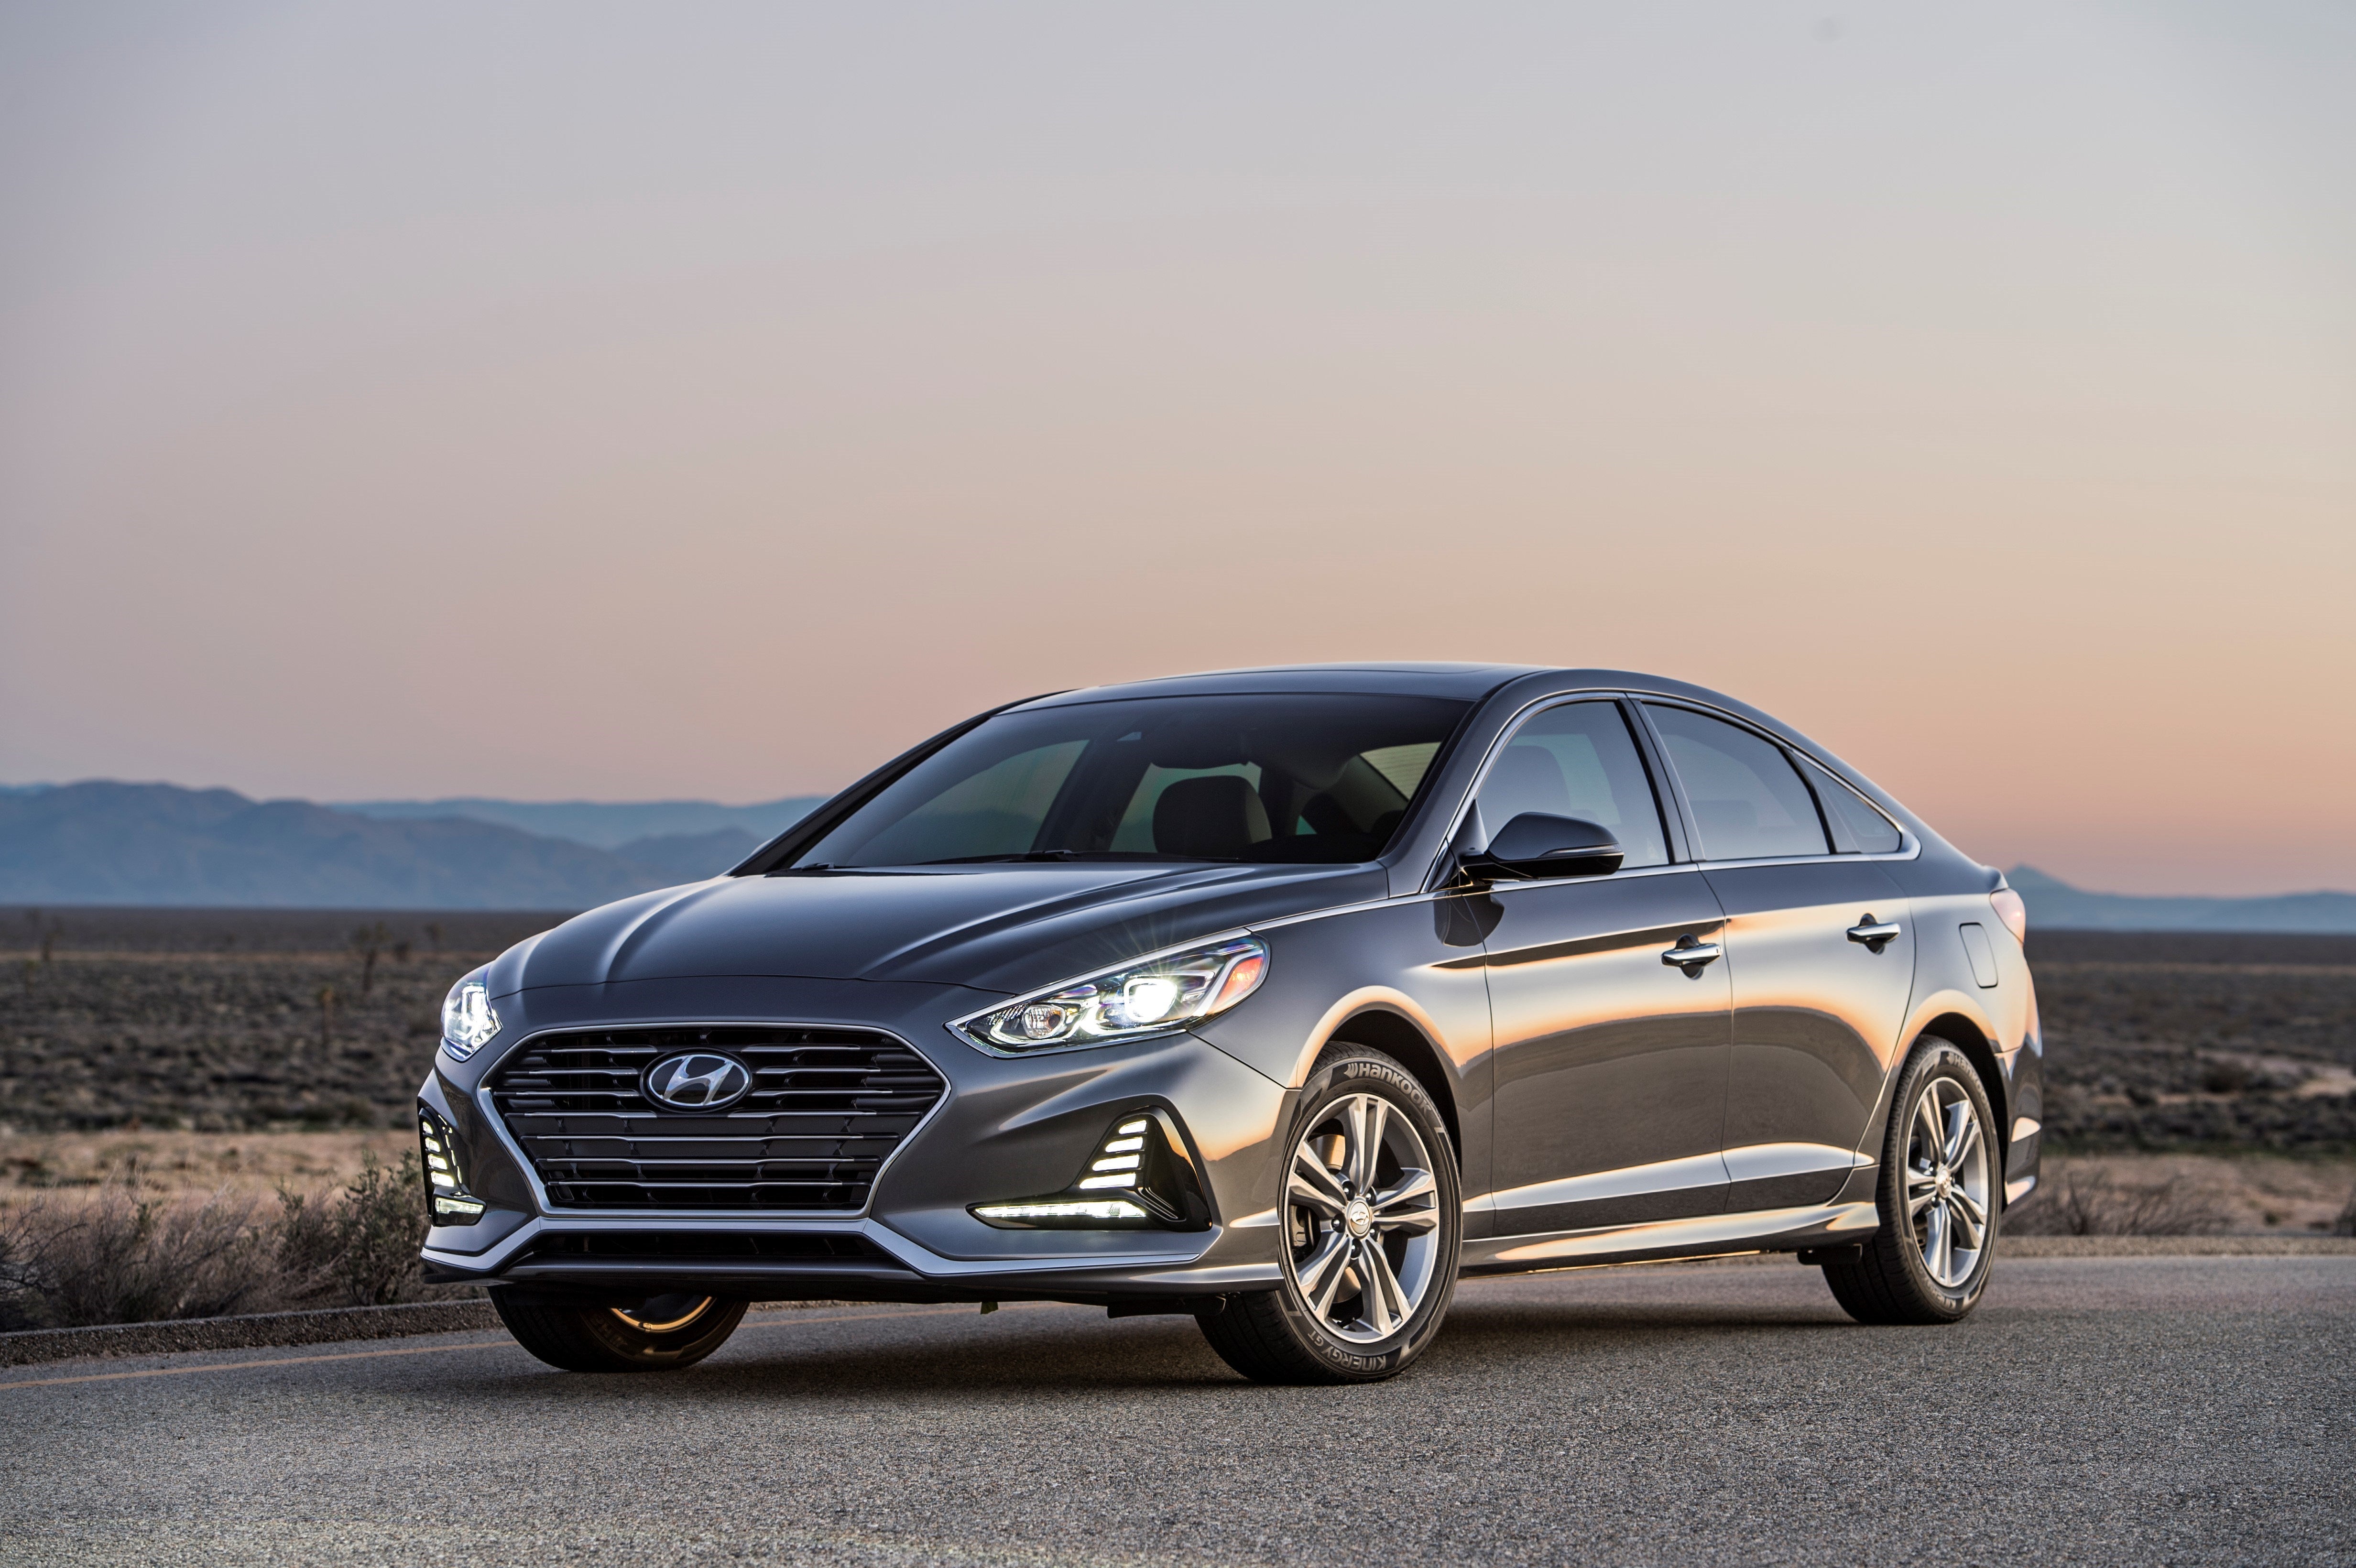 The 10 Best And Worst Things About The 2018 Hyundai Sonata